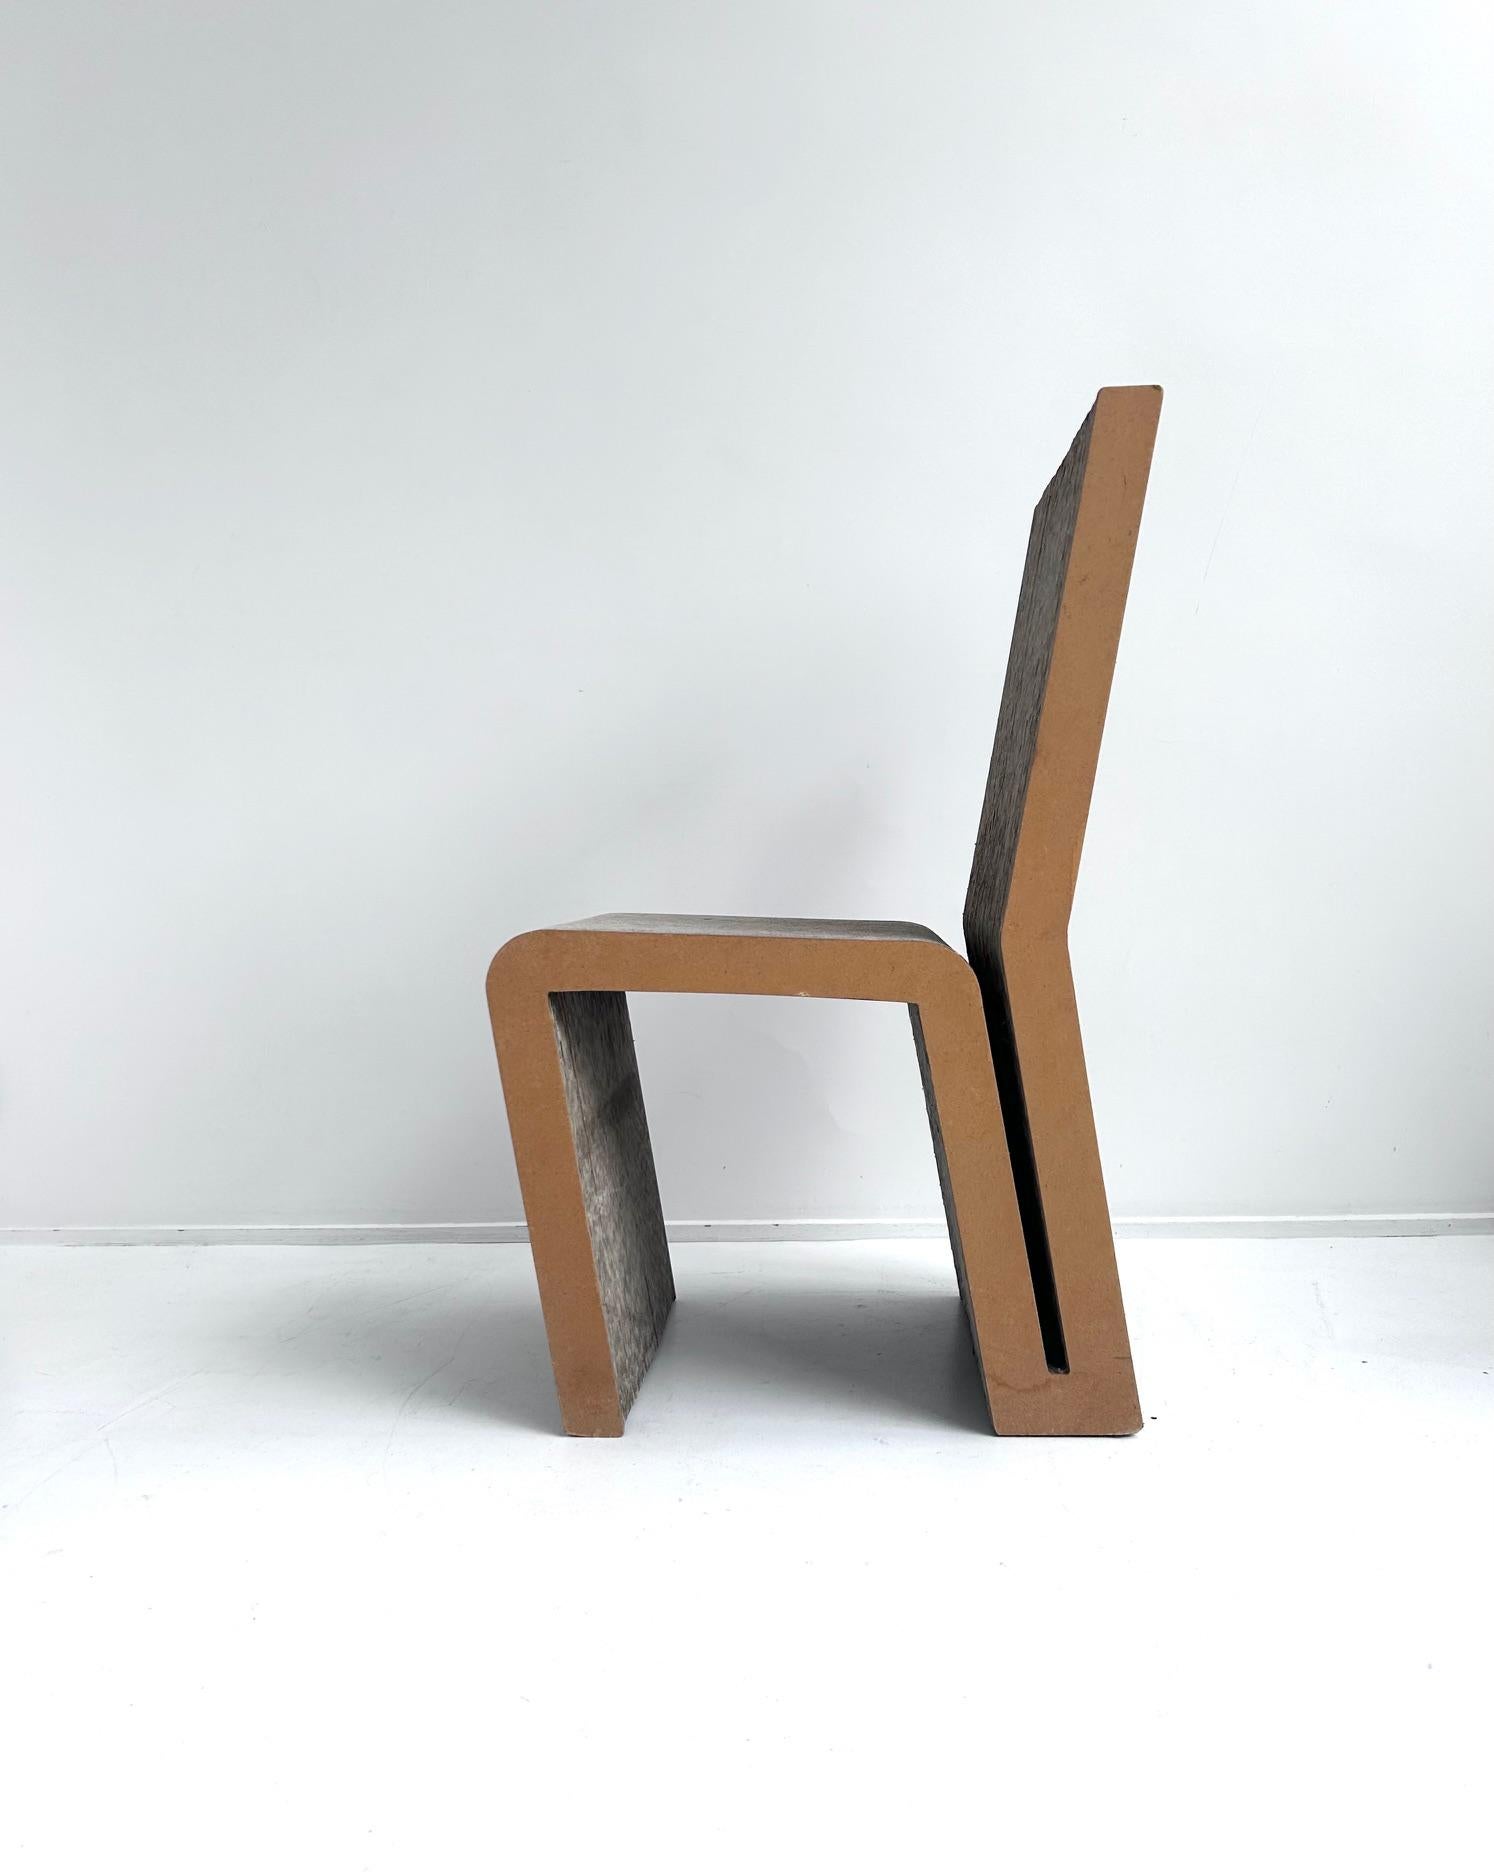 Paper Easy Edges chair by Franck Gehry, Vitra, 1972